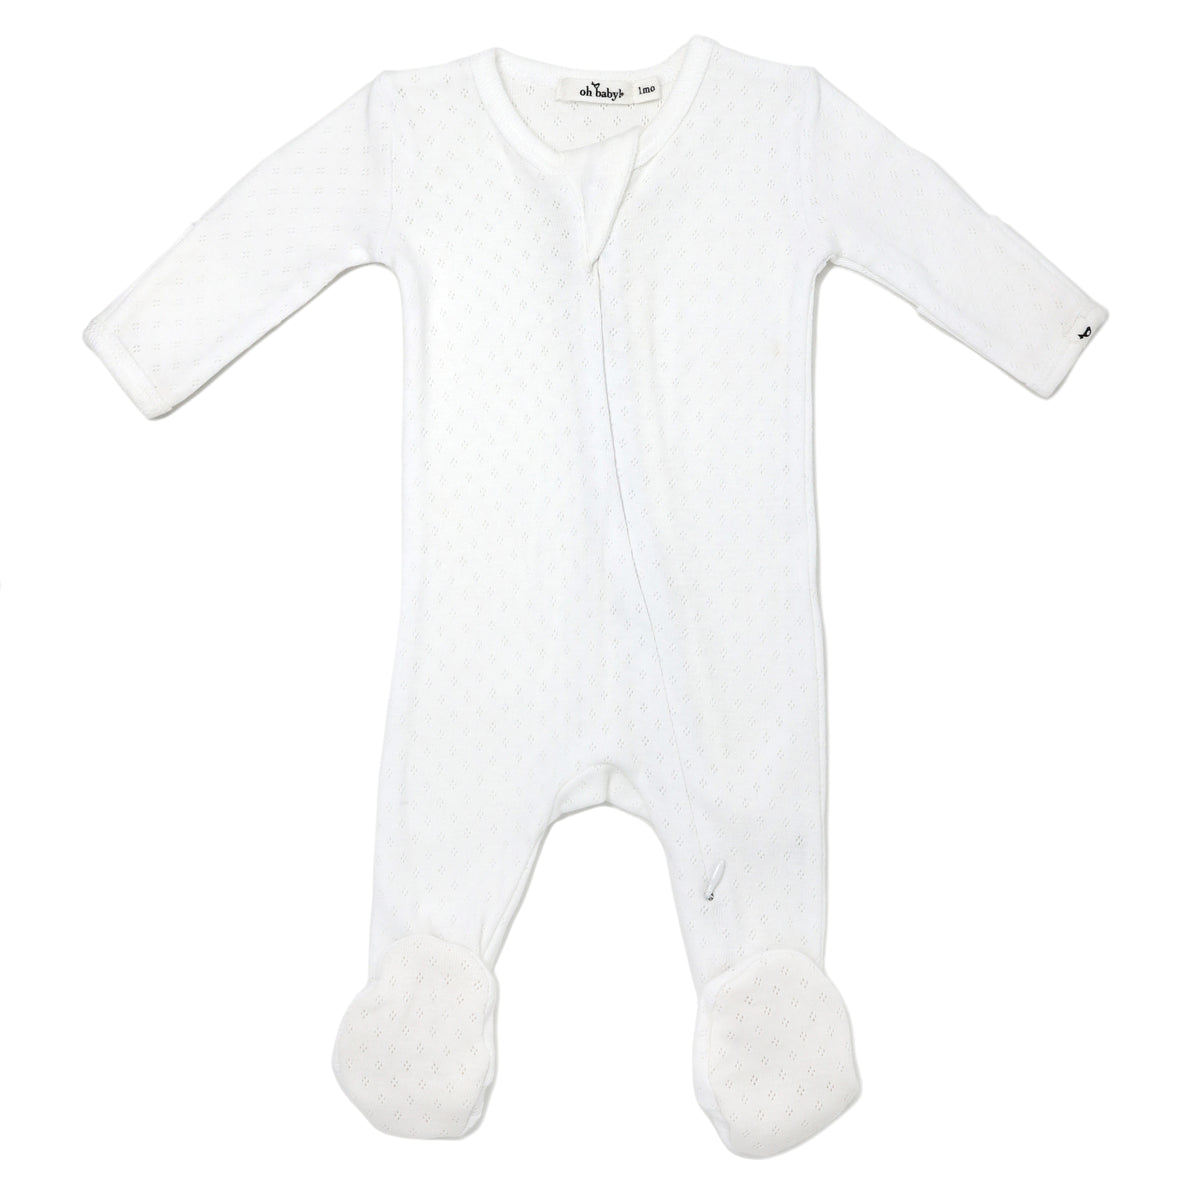 oh baby! Two Way Zipper Footie - Pointelle - Cream